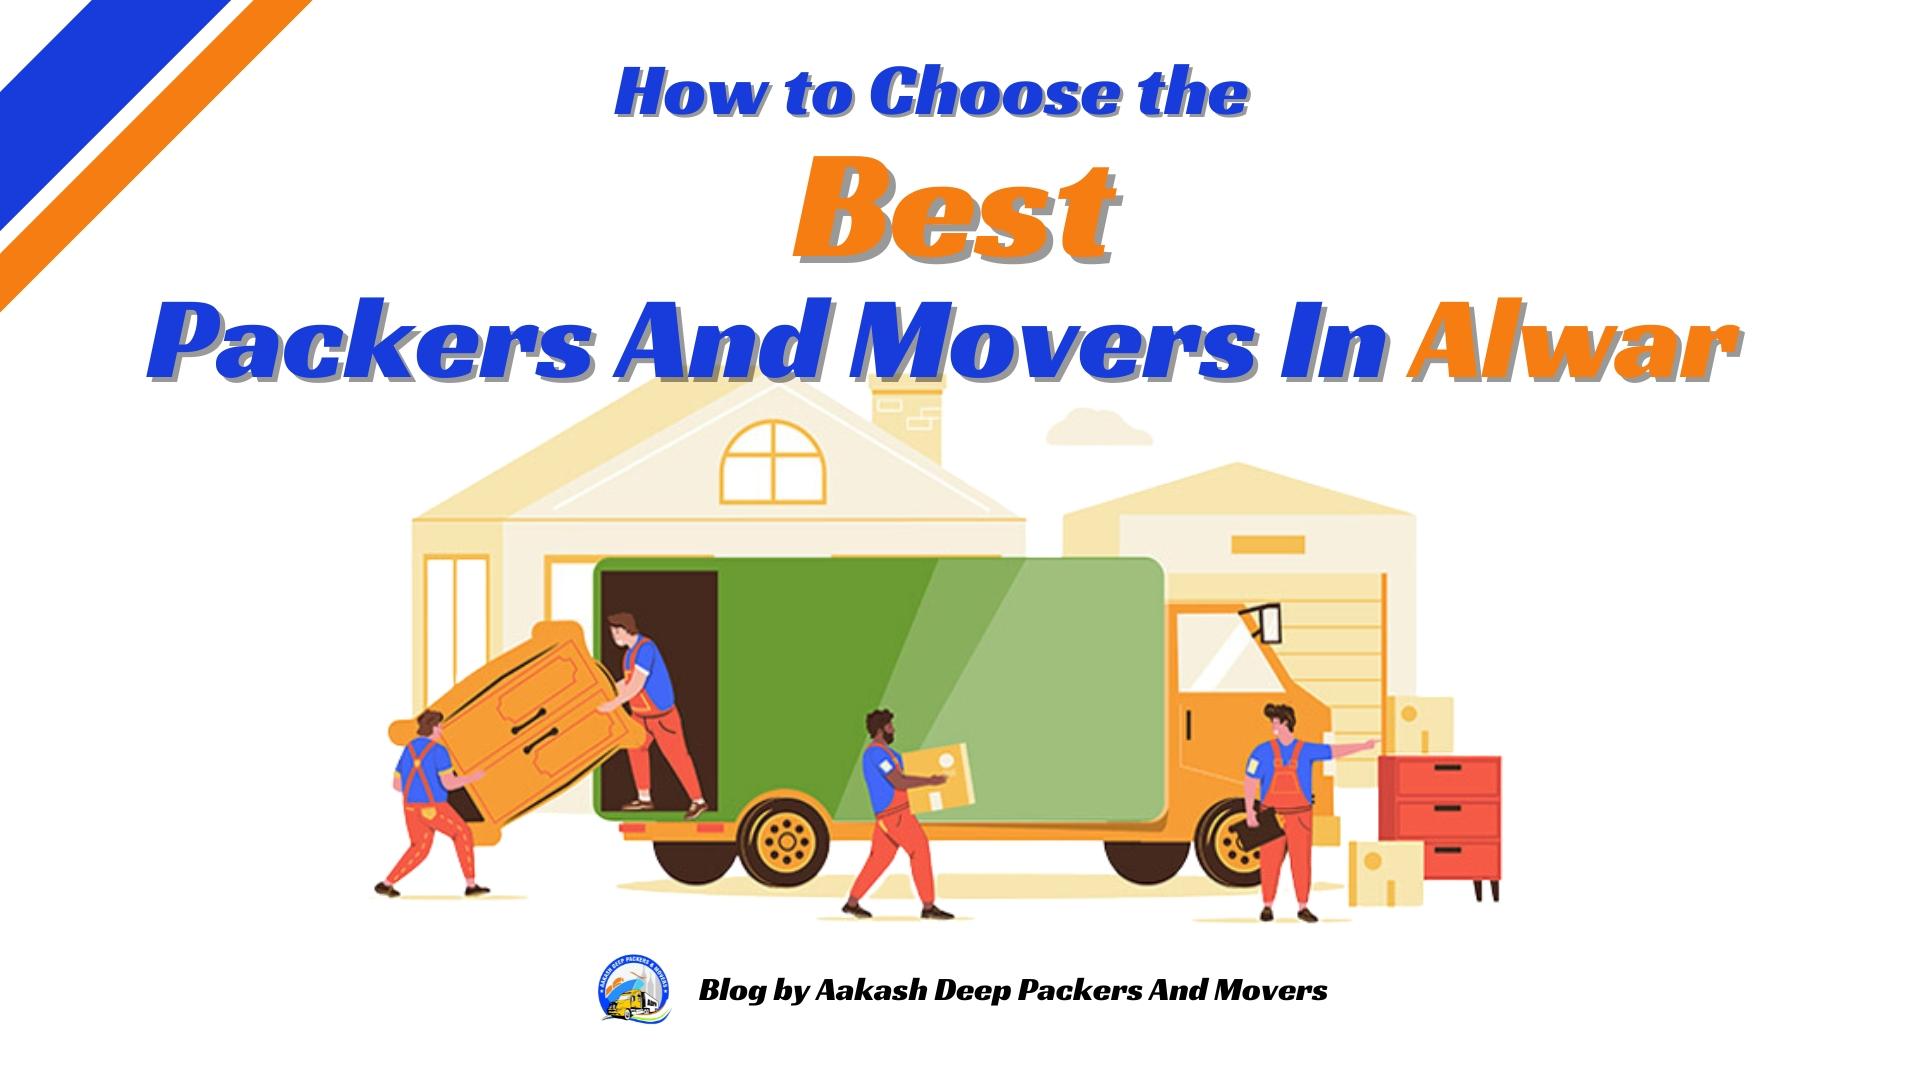 How to Choose the Best Packers and Movers in Alwar